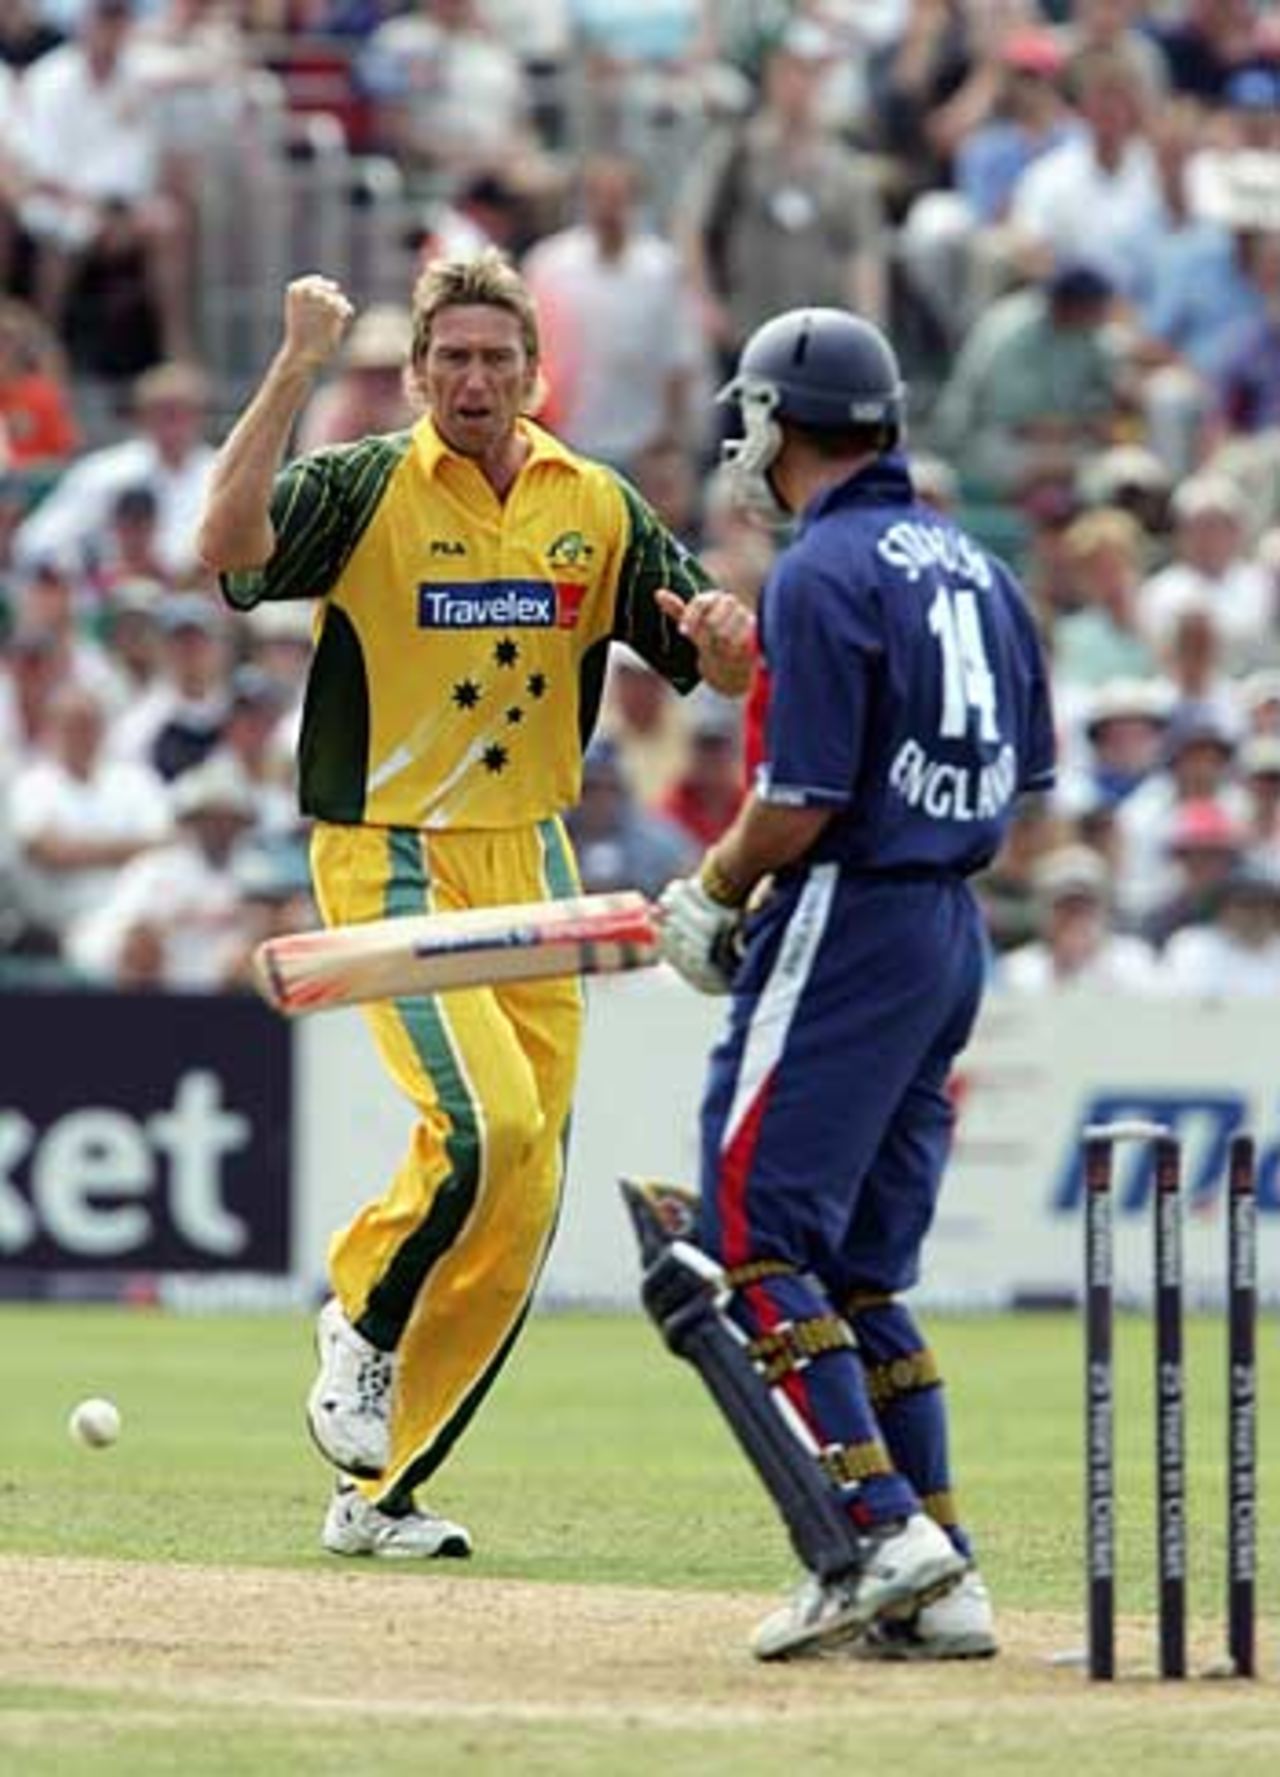 Glenn McGrath claims his second wicket as he bowls Andrew Strauss, England v Australia, NatWest Series, Bristol, June 19